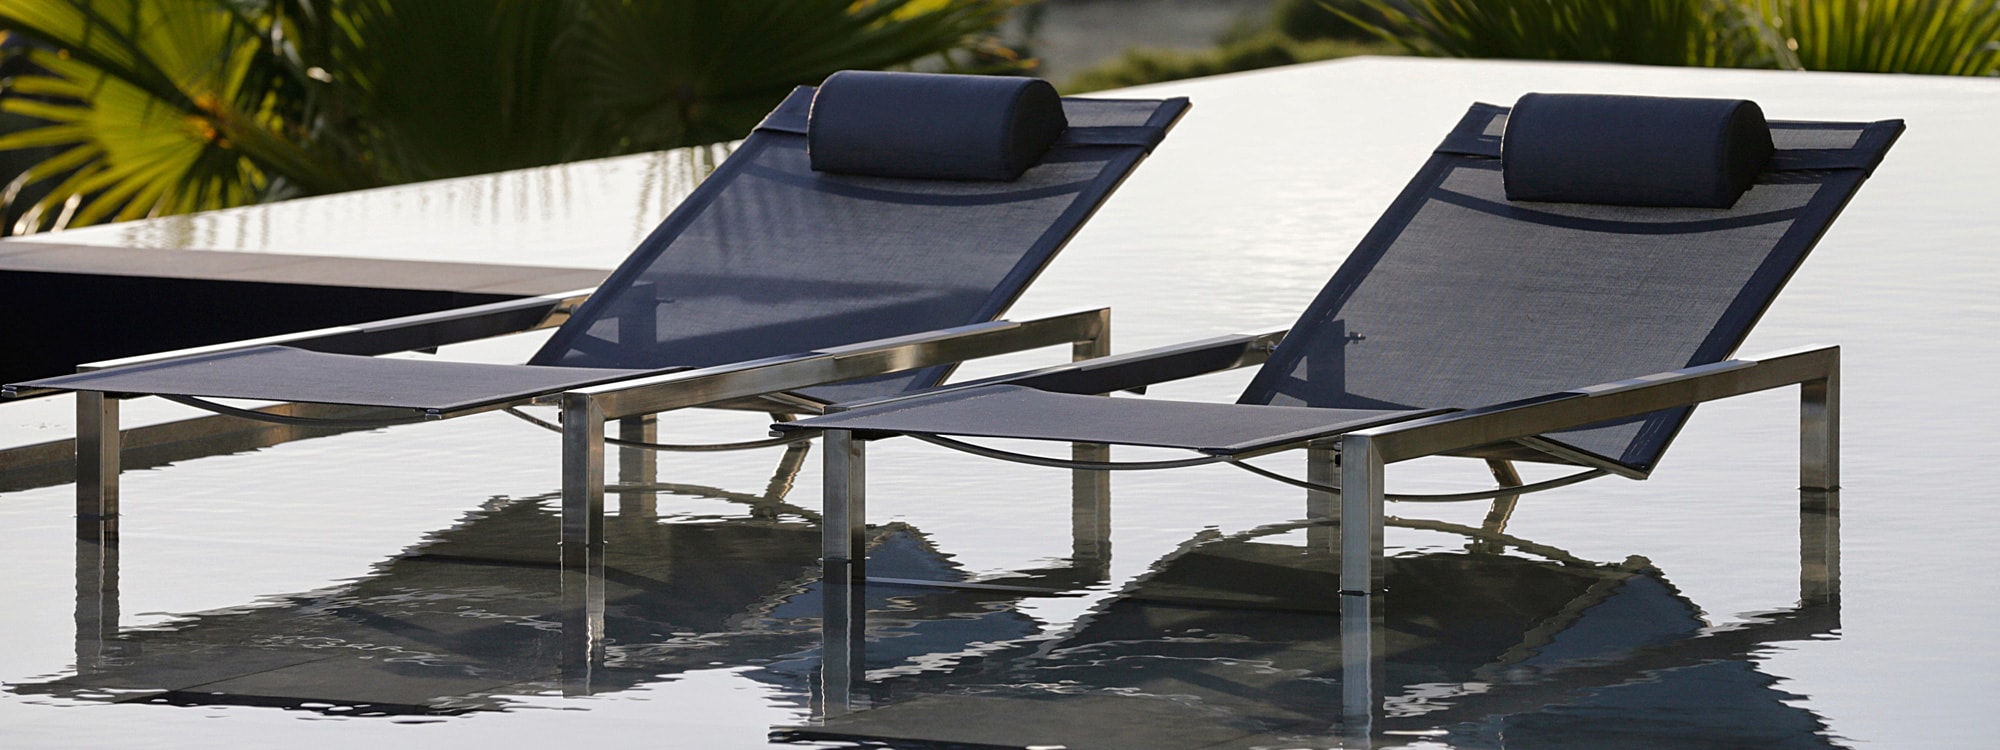 Image of pair of Ninix sun loungers with electro-polished stainless steel frames and black seats and backs sat in water of swimming pool by Royal Botania